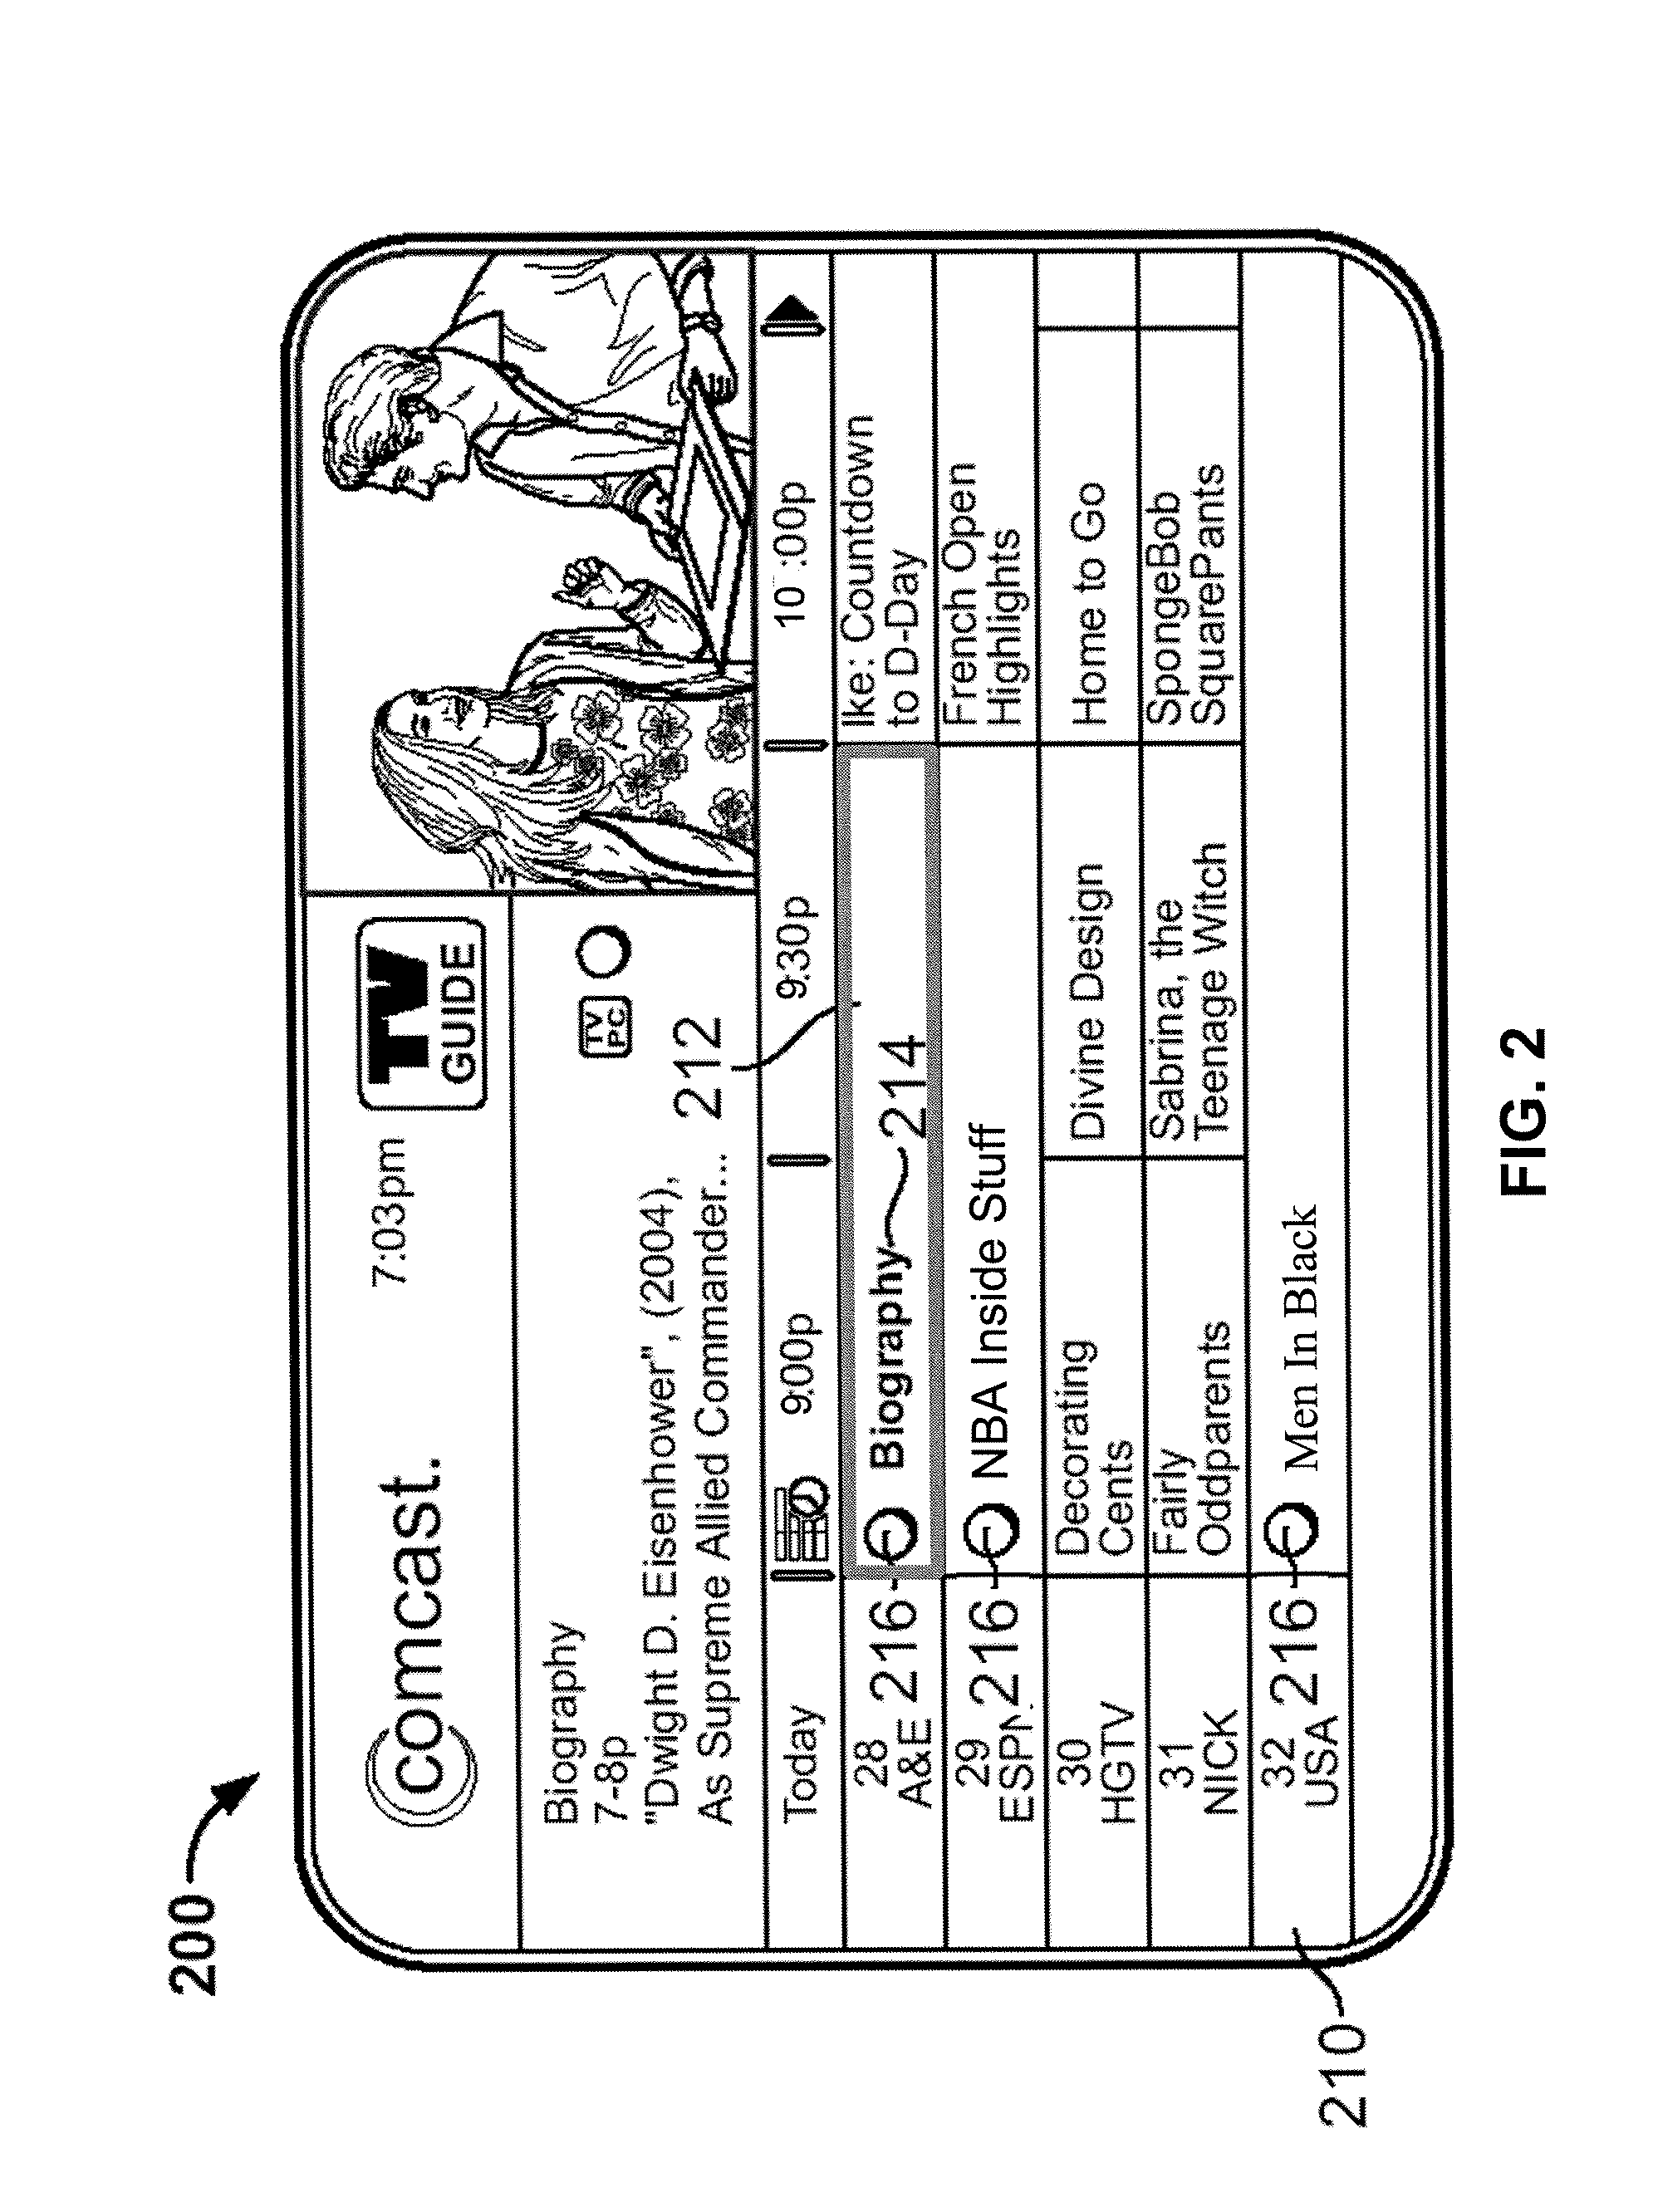 Systems and methods for recording multiple programs simultaneously with a single tuner